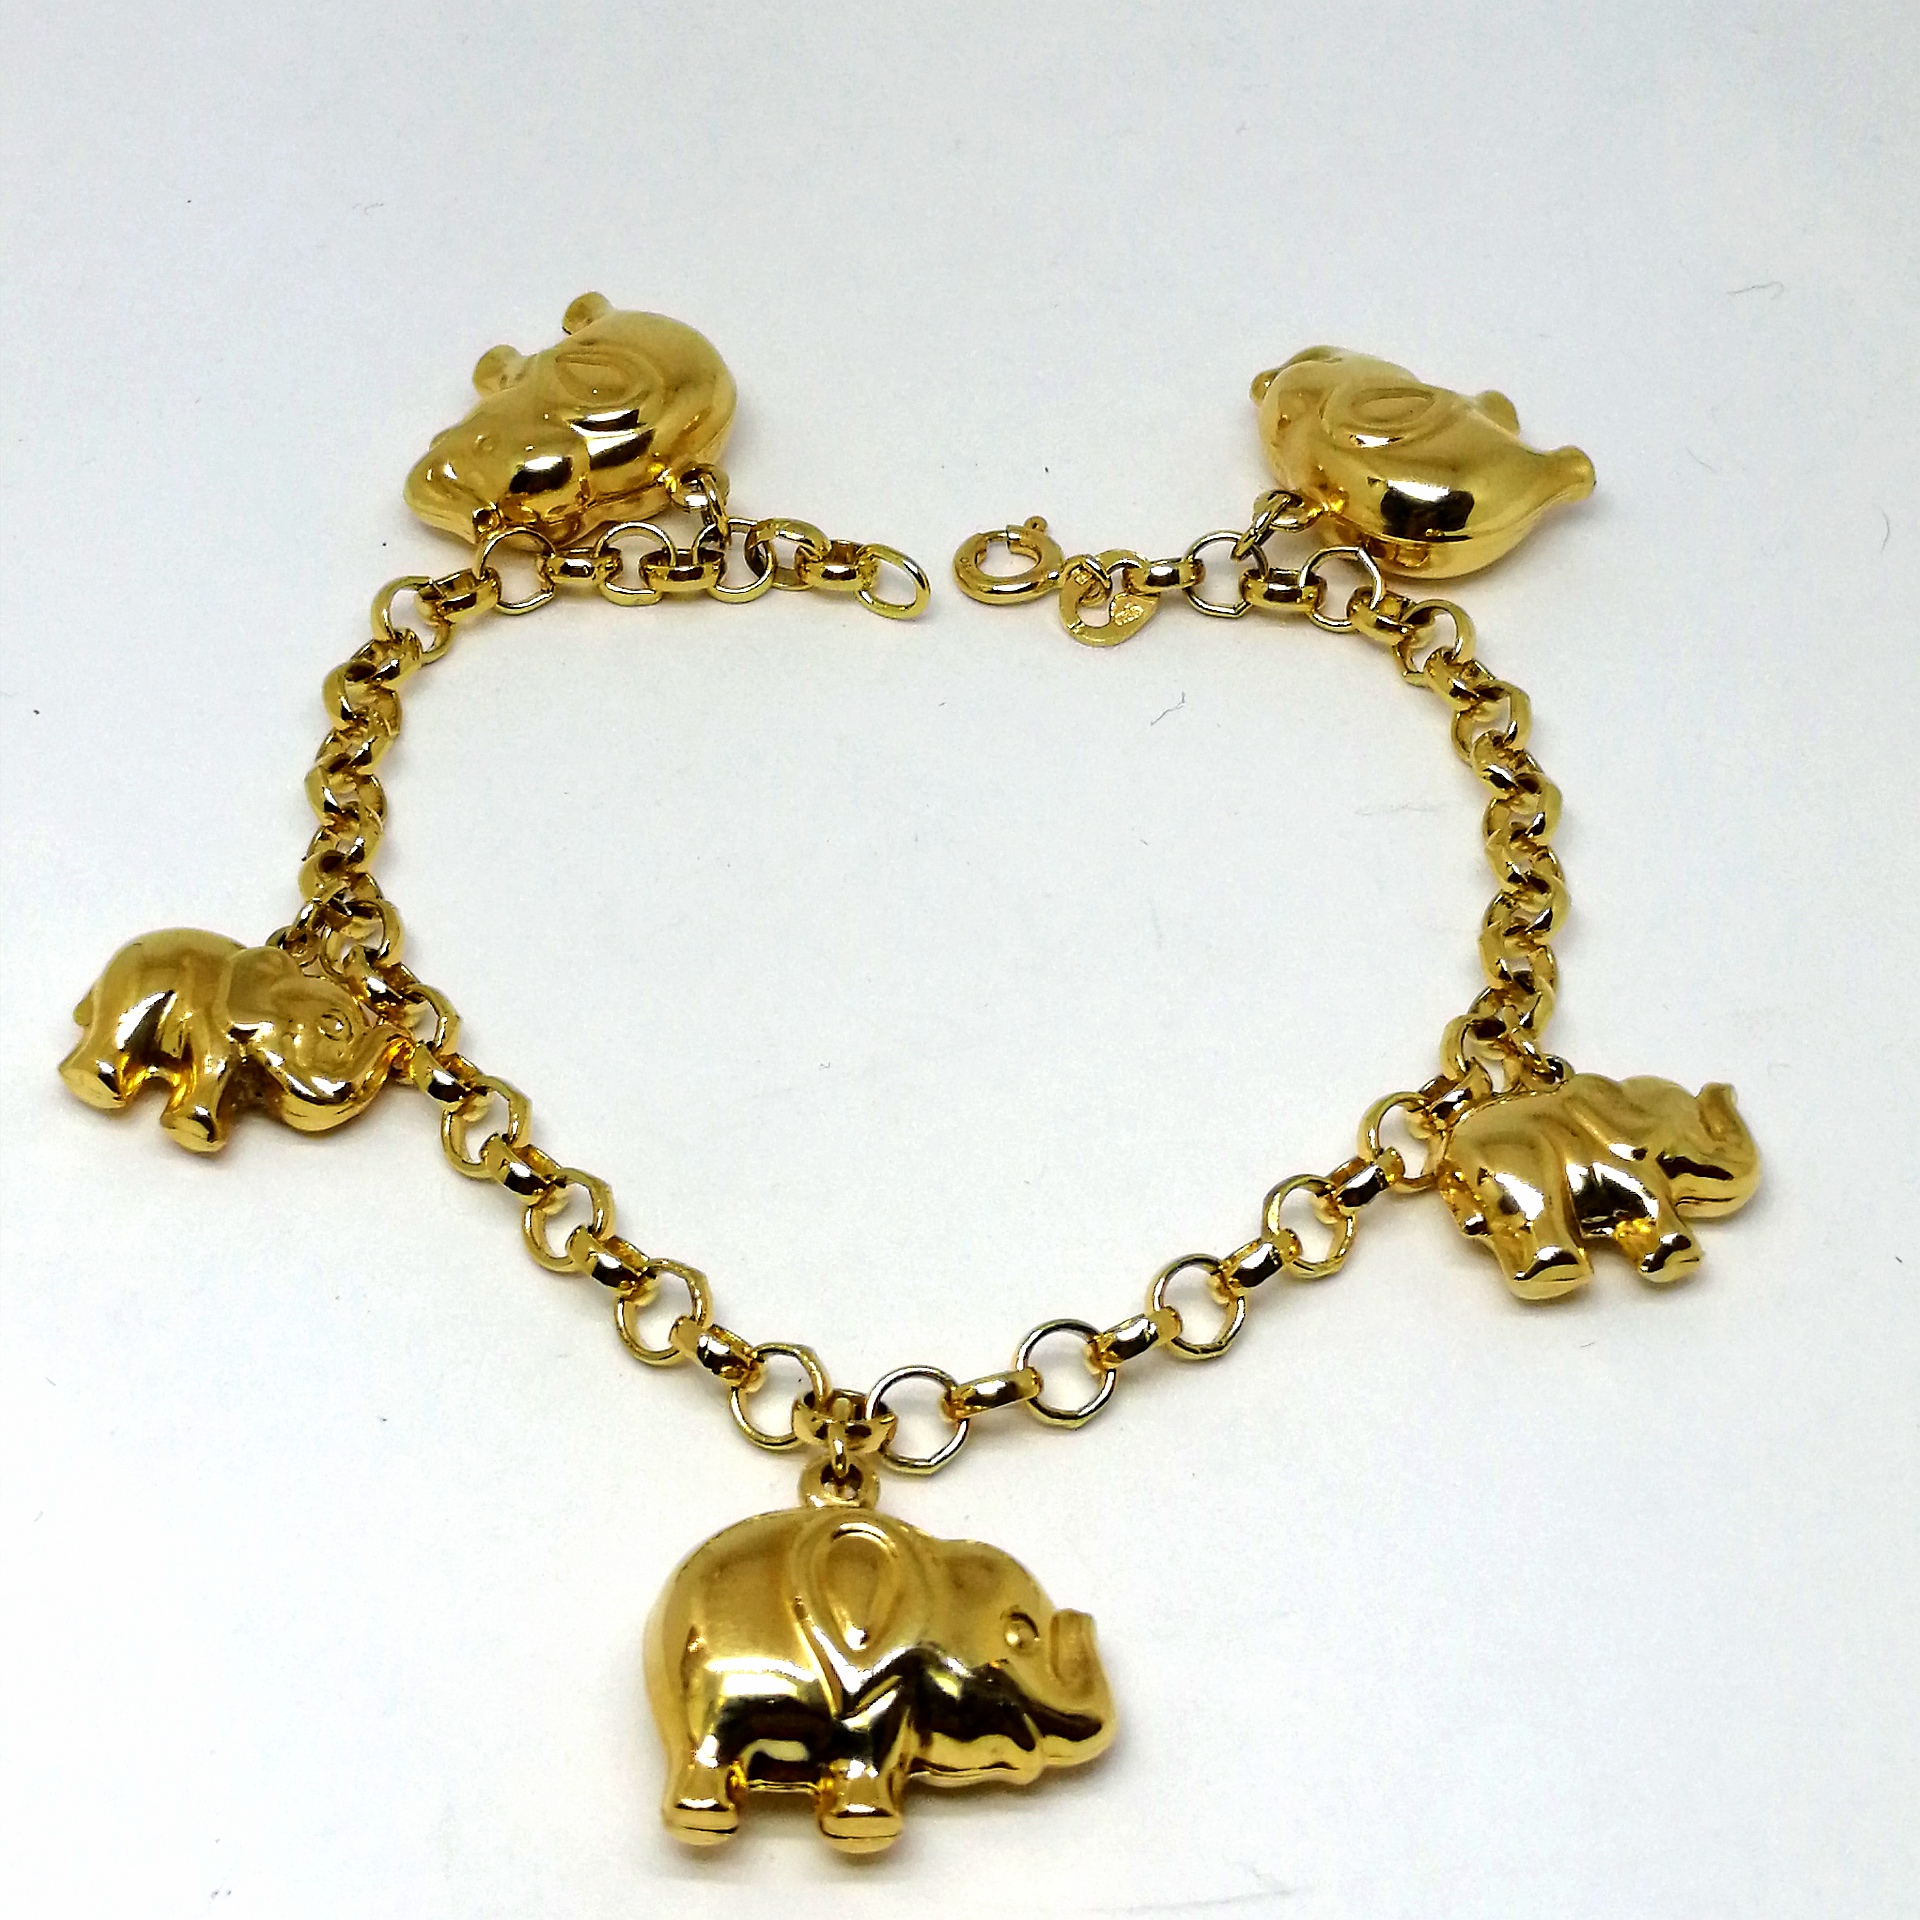 Women Cute Elephant Charm Bracelets, Gold Color Tiny Animal Pendant with  Adjustable Satellite Chain,Girls Gift Jewelry